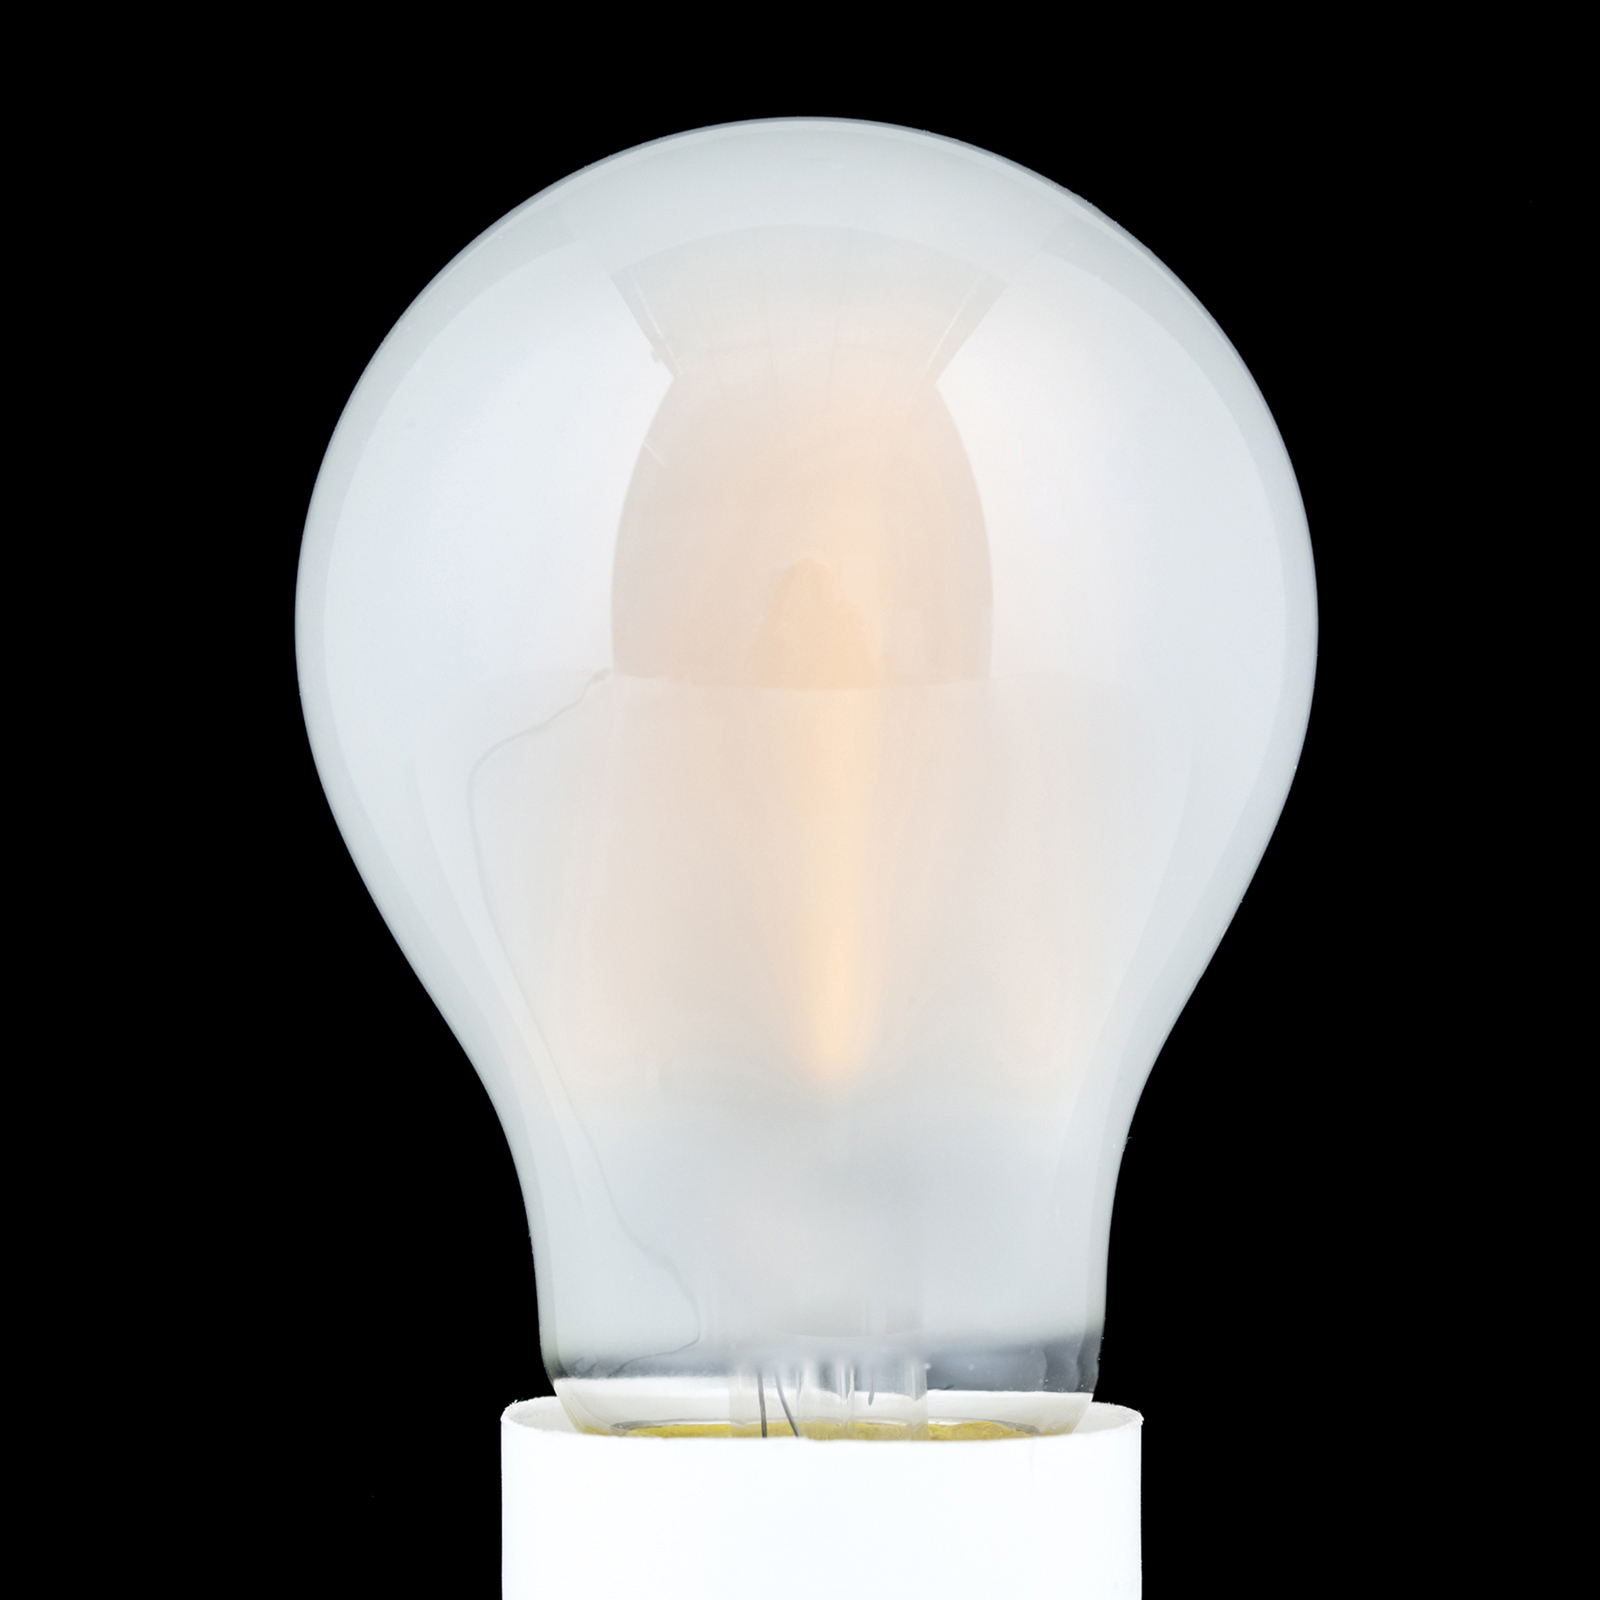 Ampoule LED E27 8 W 2 700 K 980 lm mate dimmable